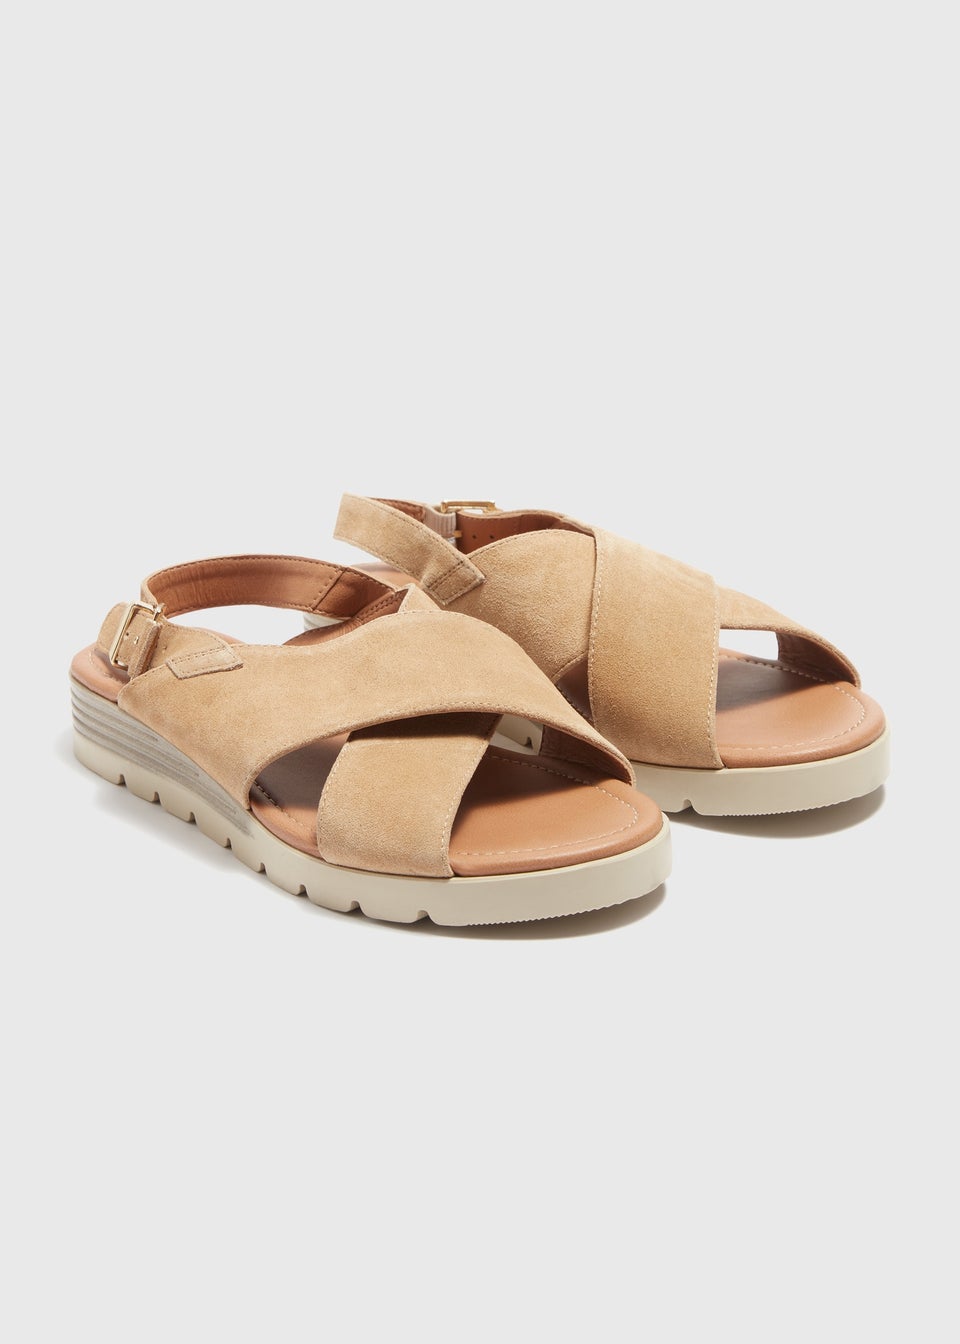 Taupe Leather Suede Cross Strap Sandals